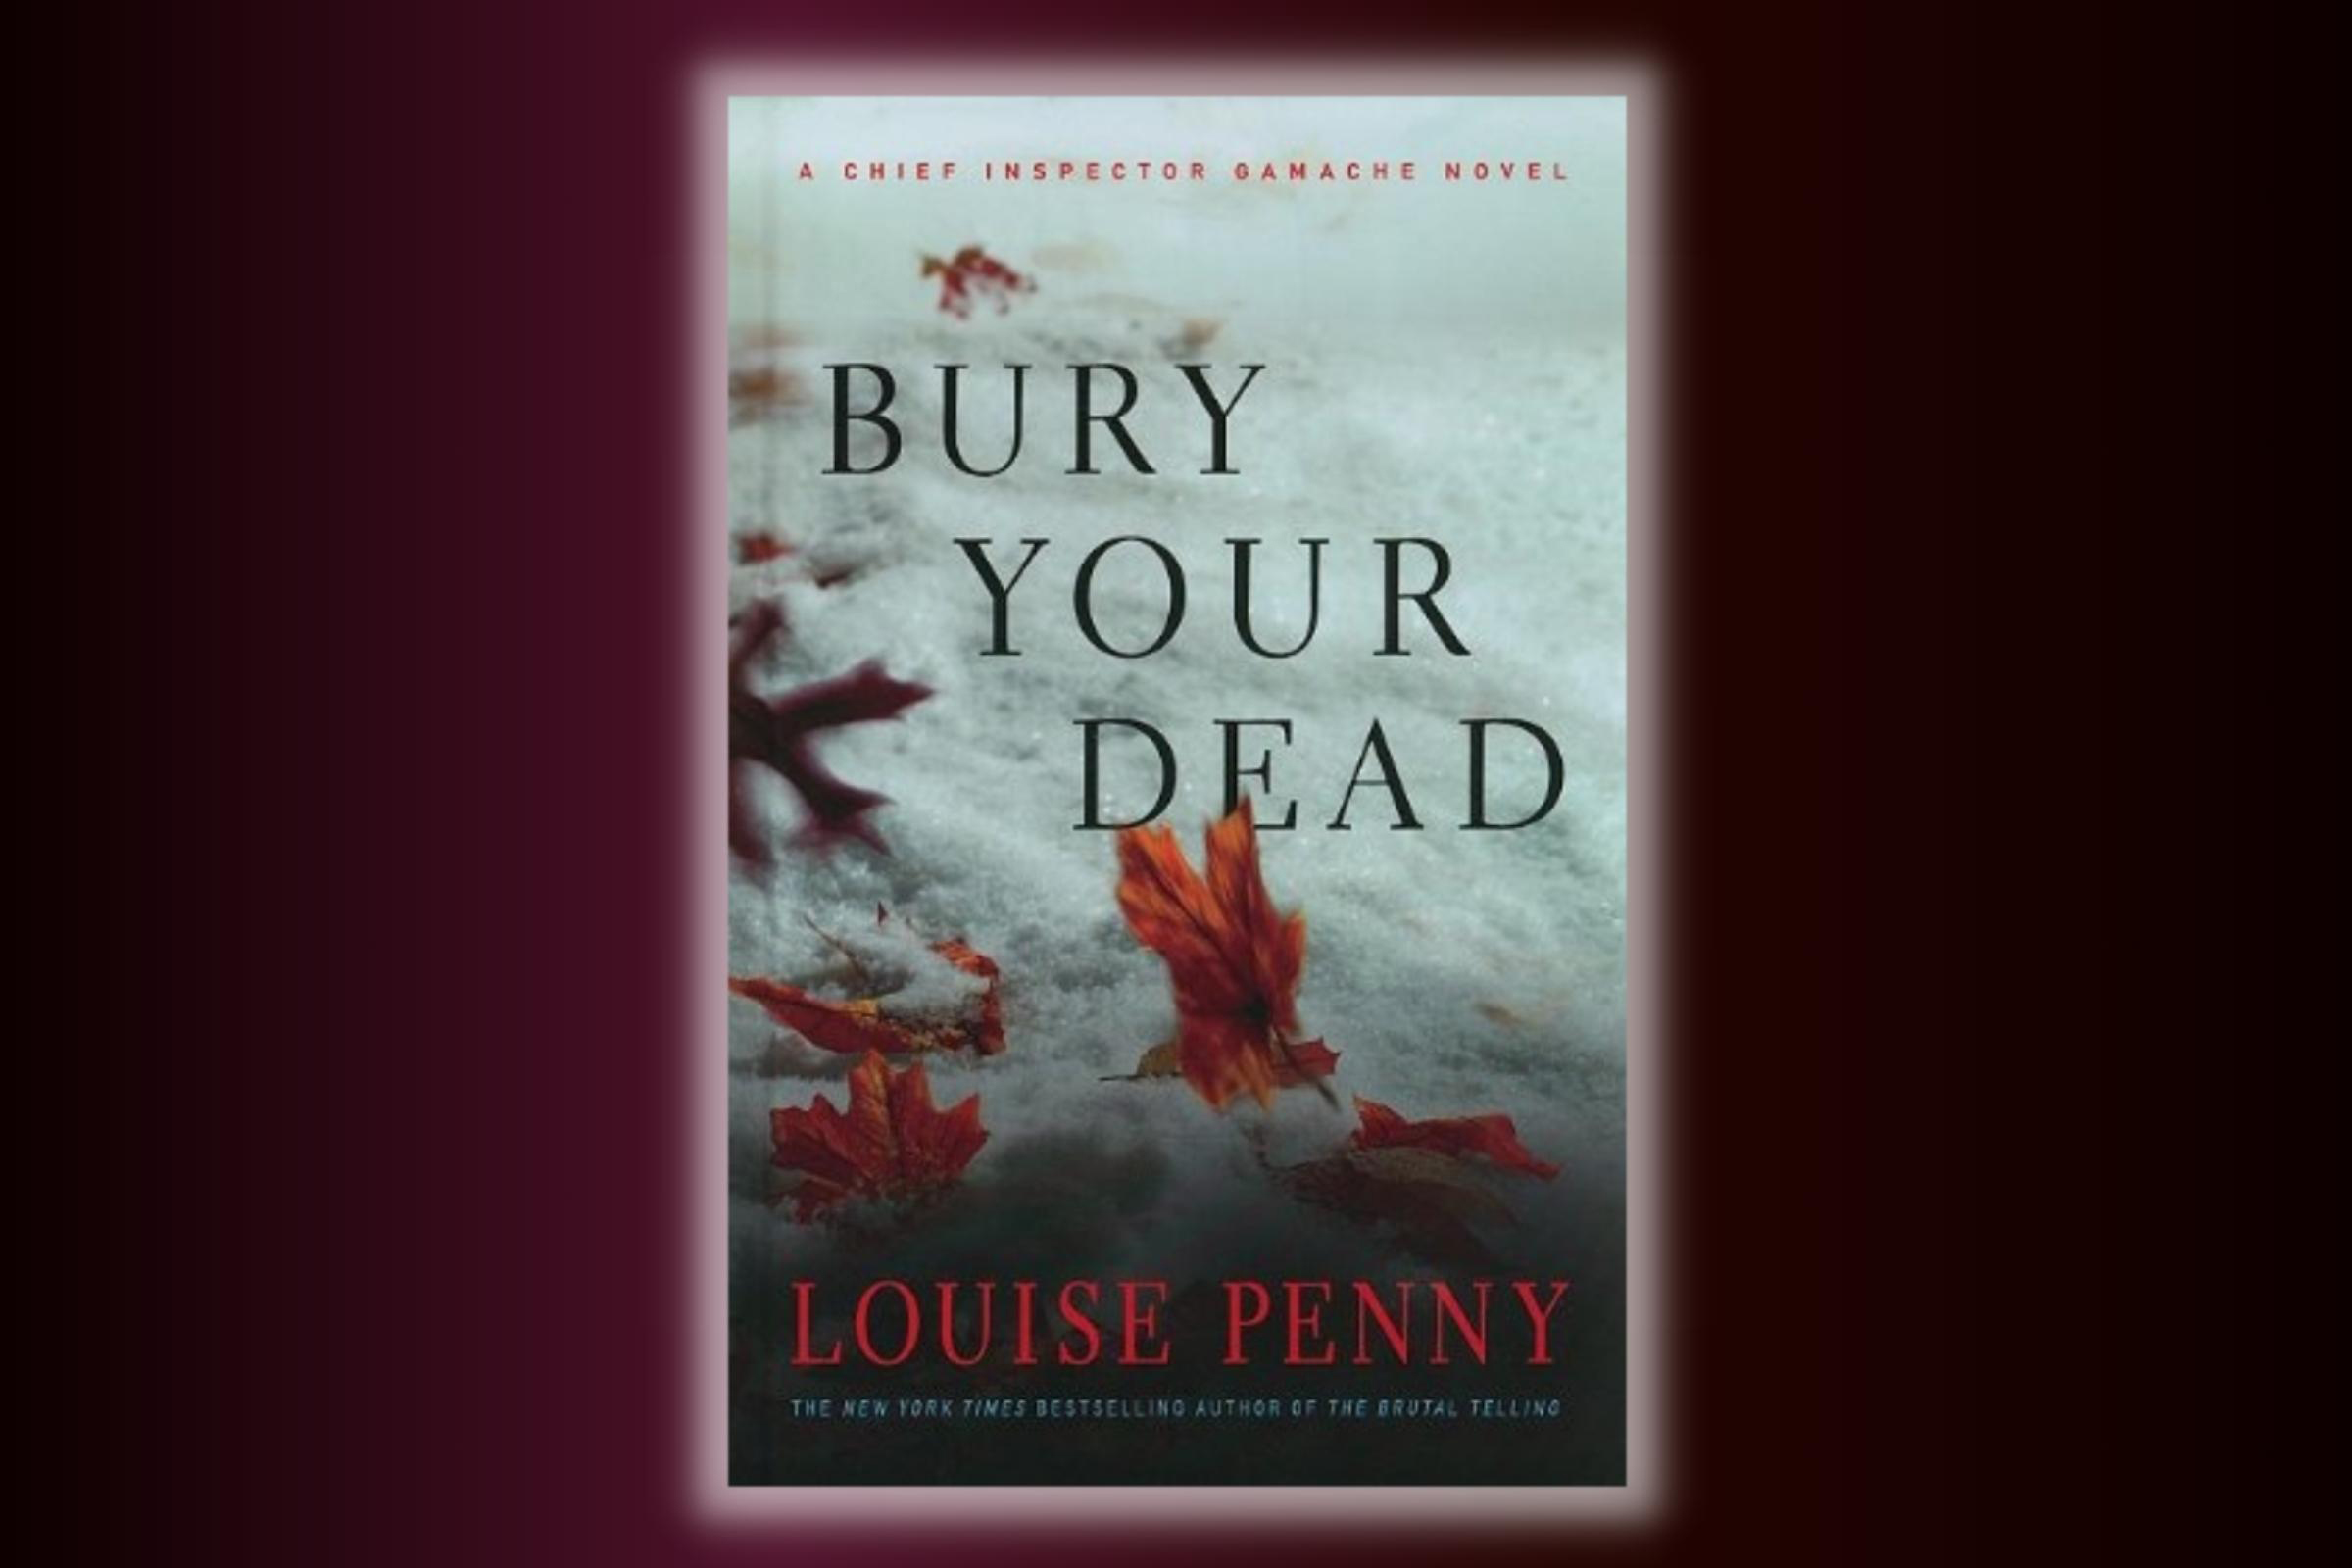 Bury Your Dead: The 100 Best Mystery and Thriller Books | TIME